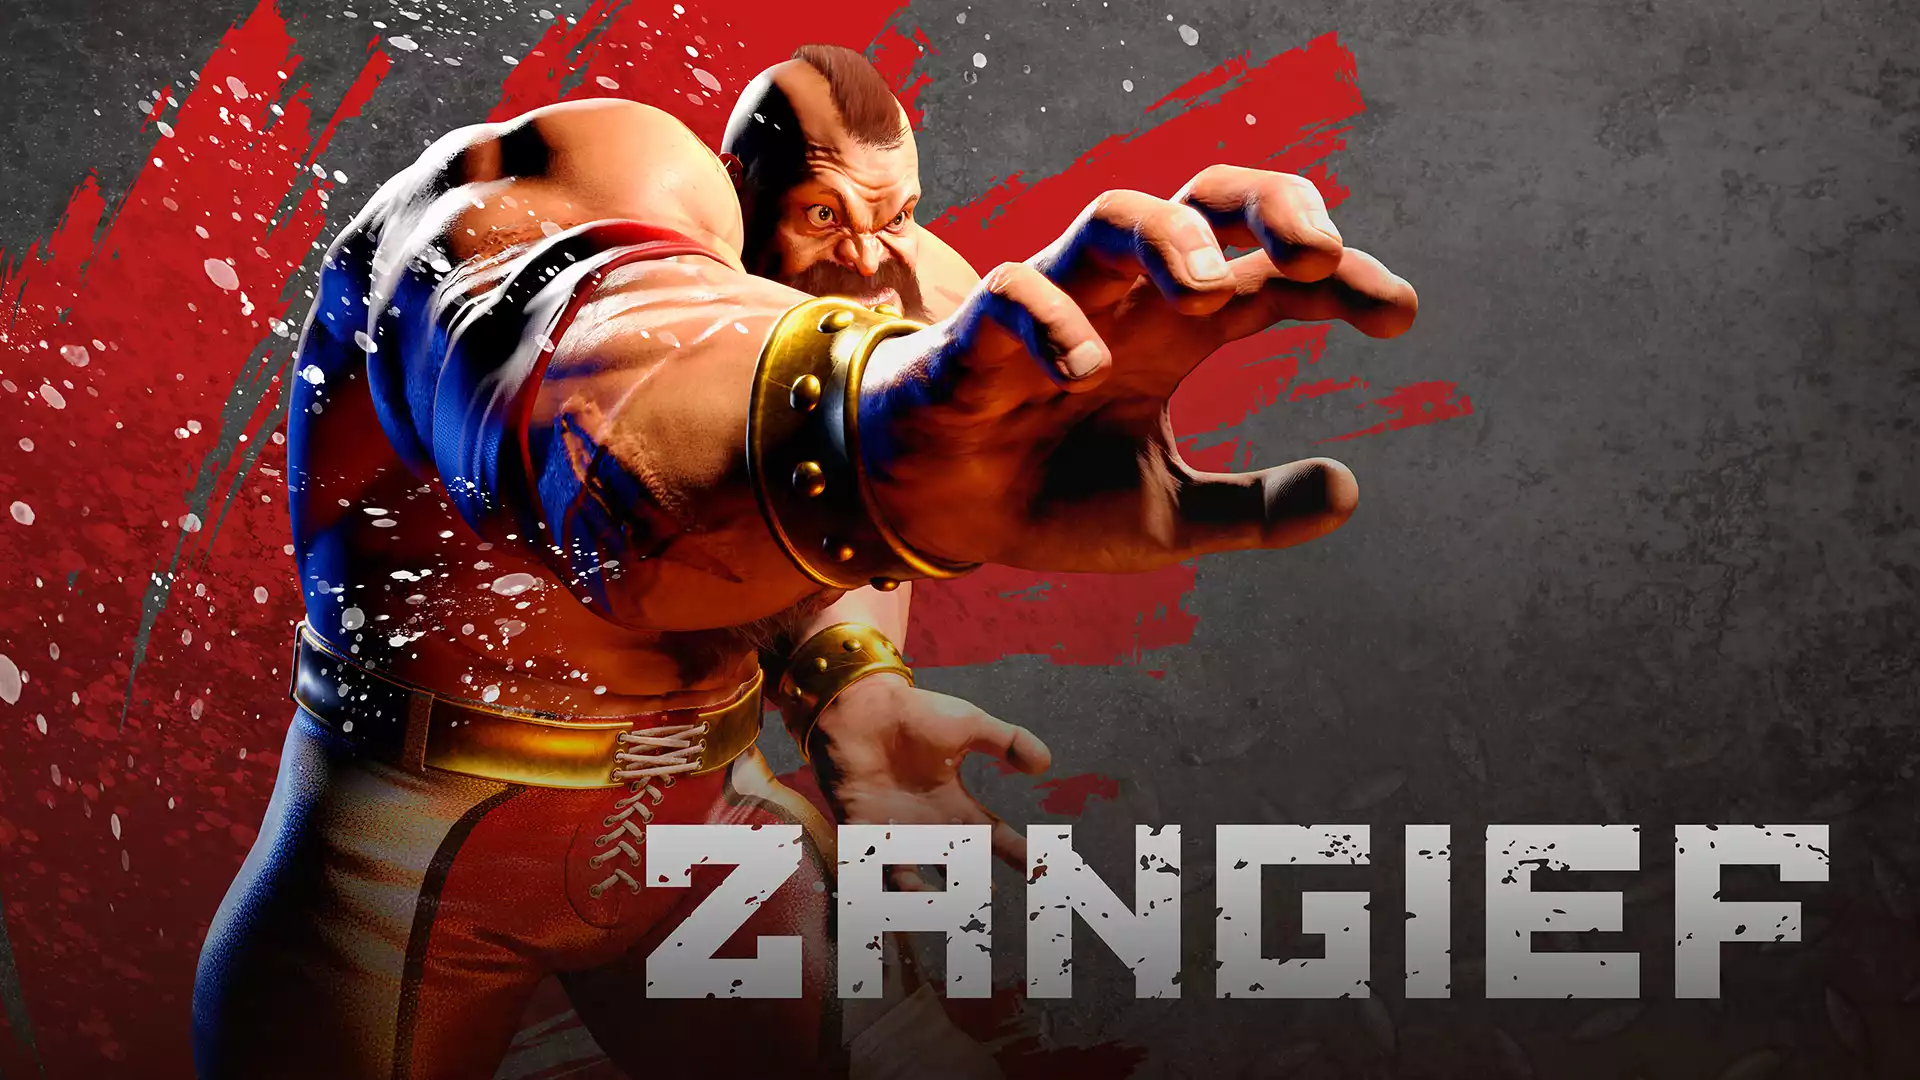 Street Fighter V: Zangief Guide - Combos and Moves List